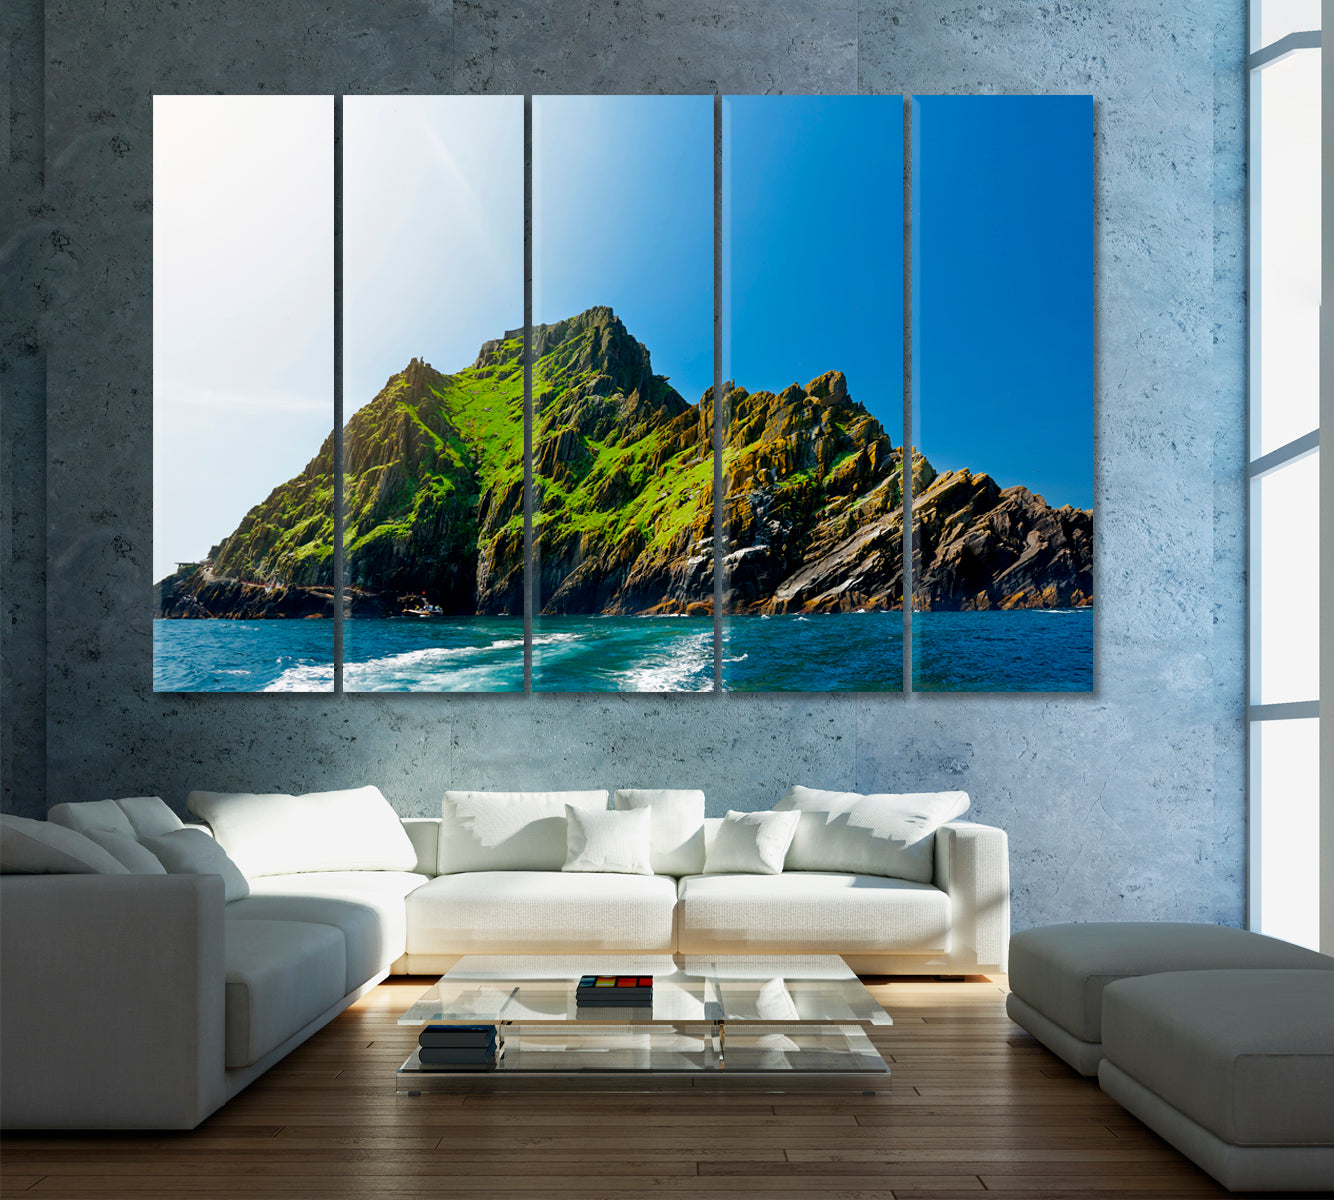 Skellig Michael (Great Skellig) Ireland Canvas Print ArtLexy 5 Panels 36"x24" inches 